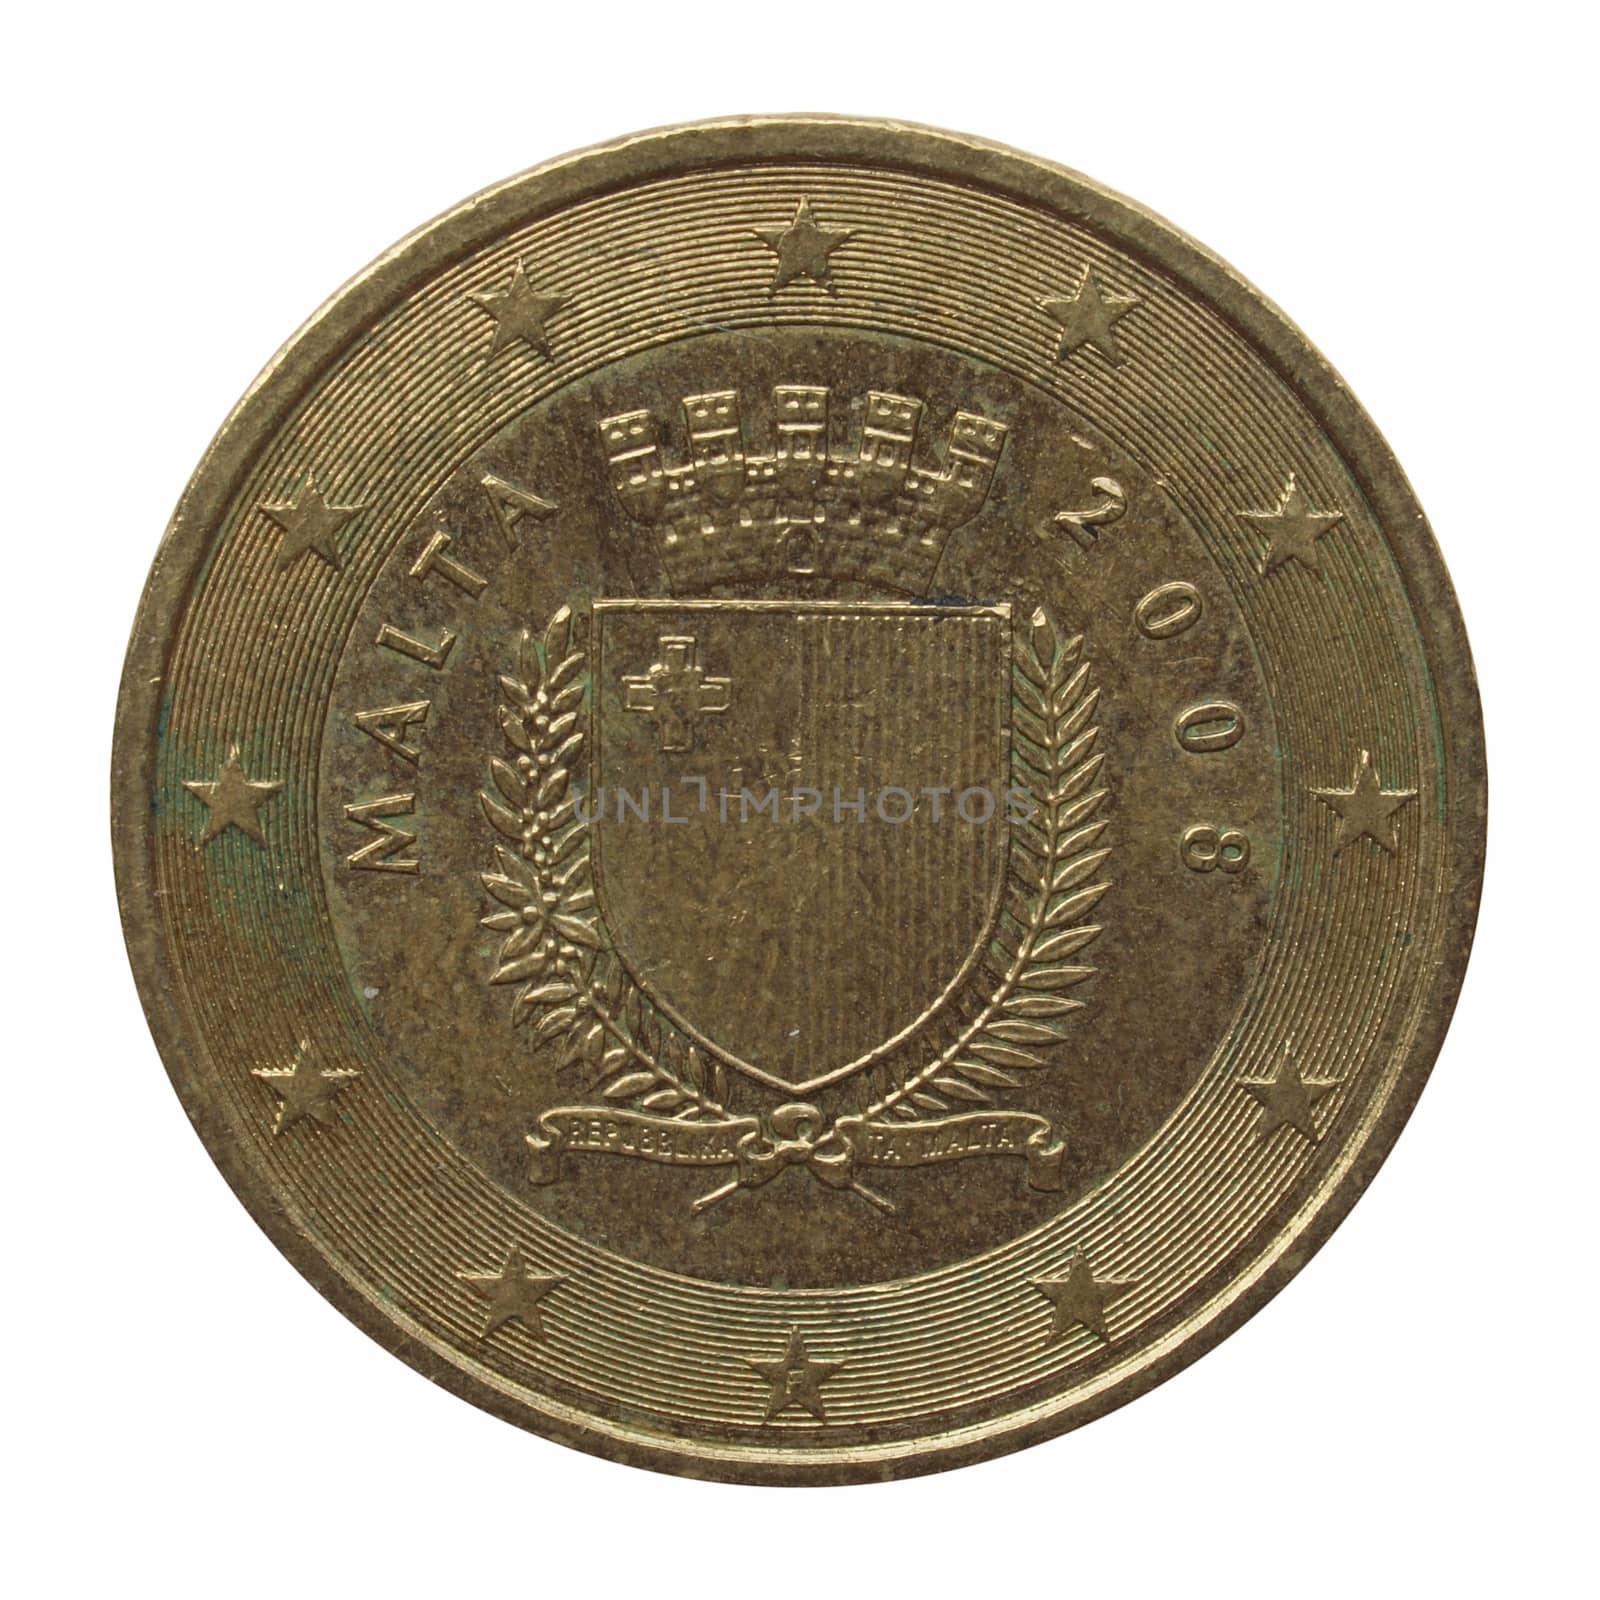 Euro coin from Malta by paolo77